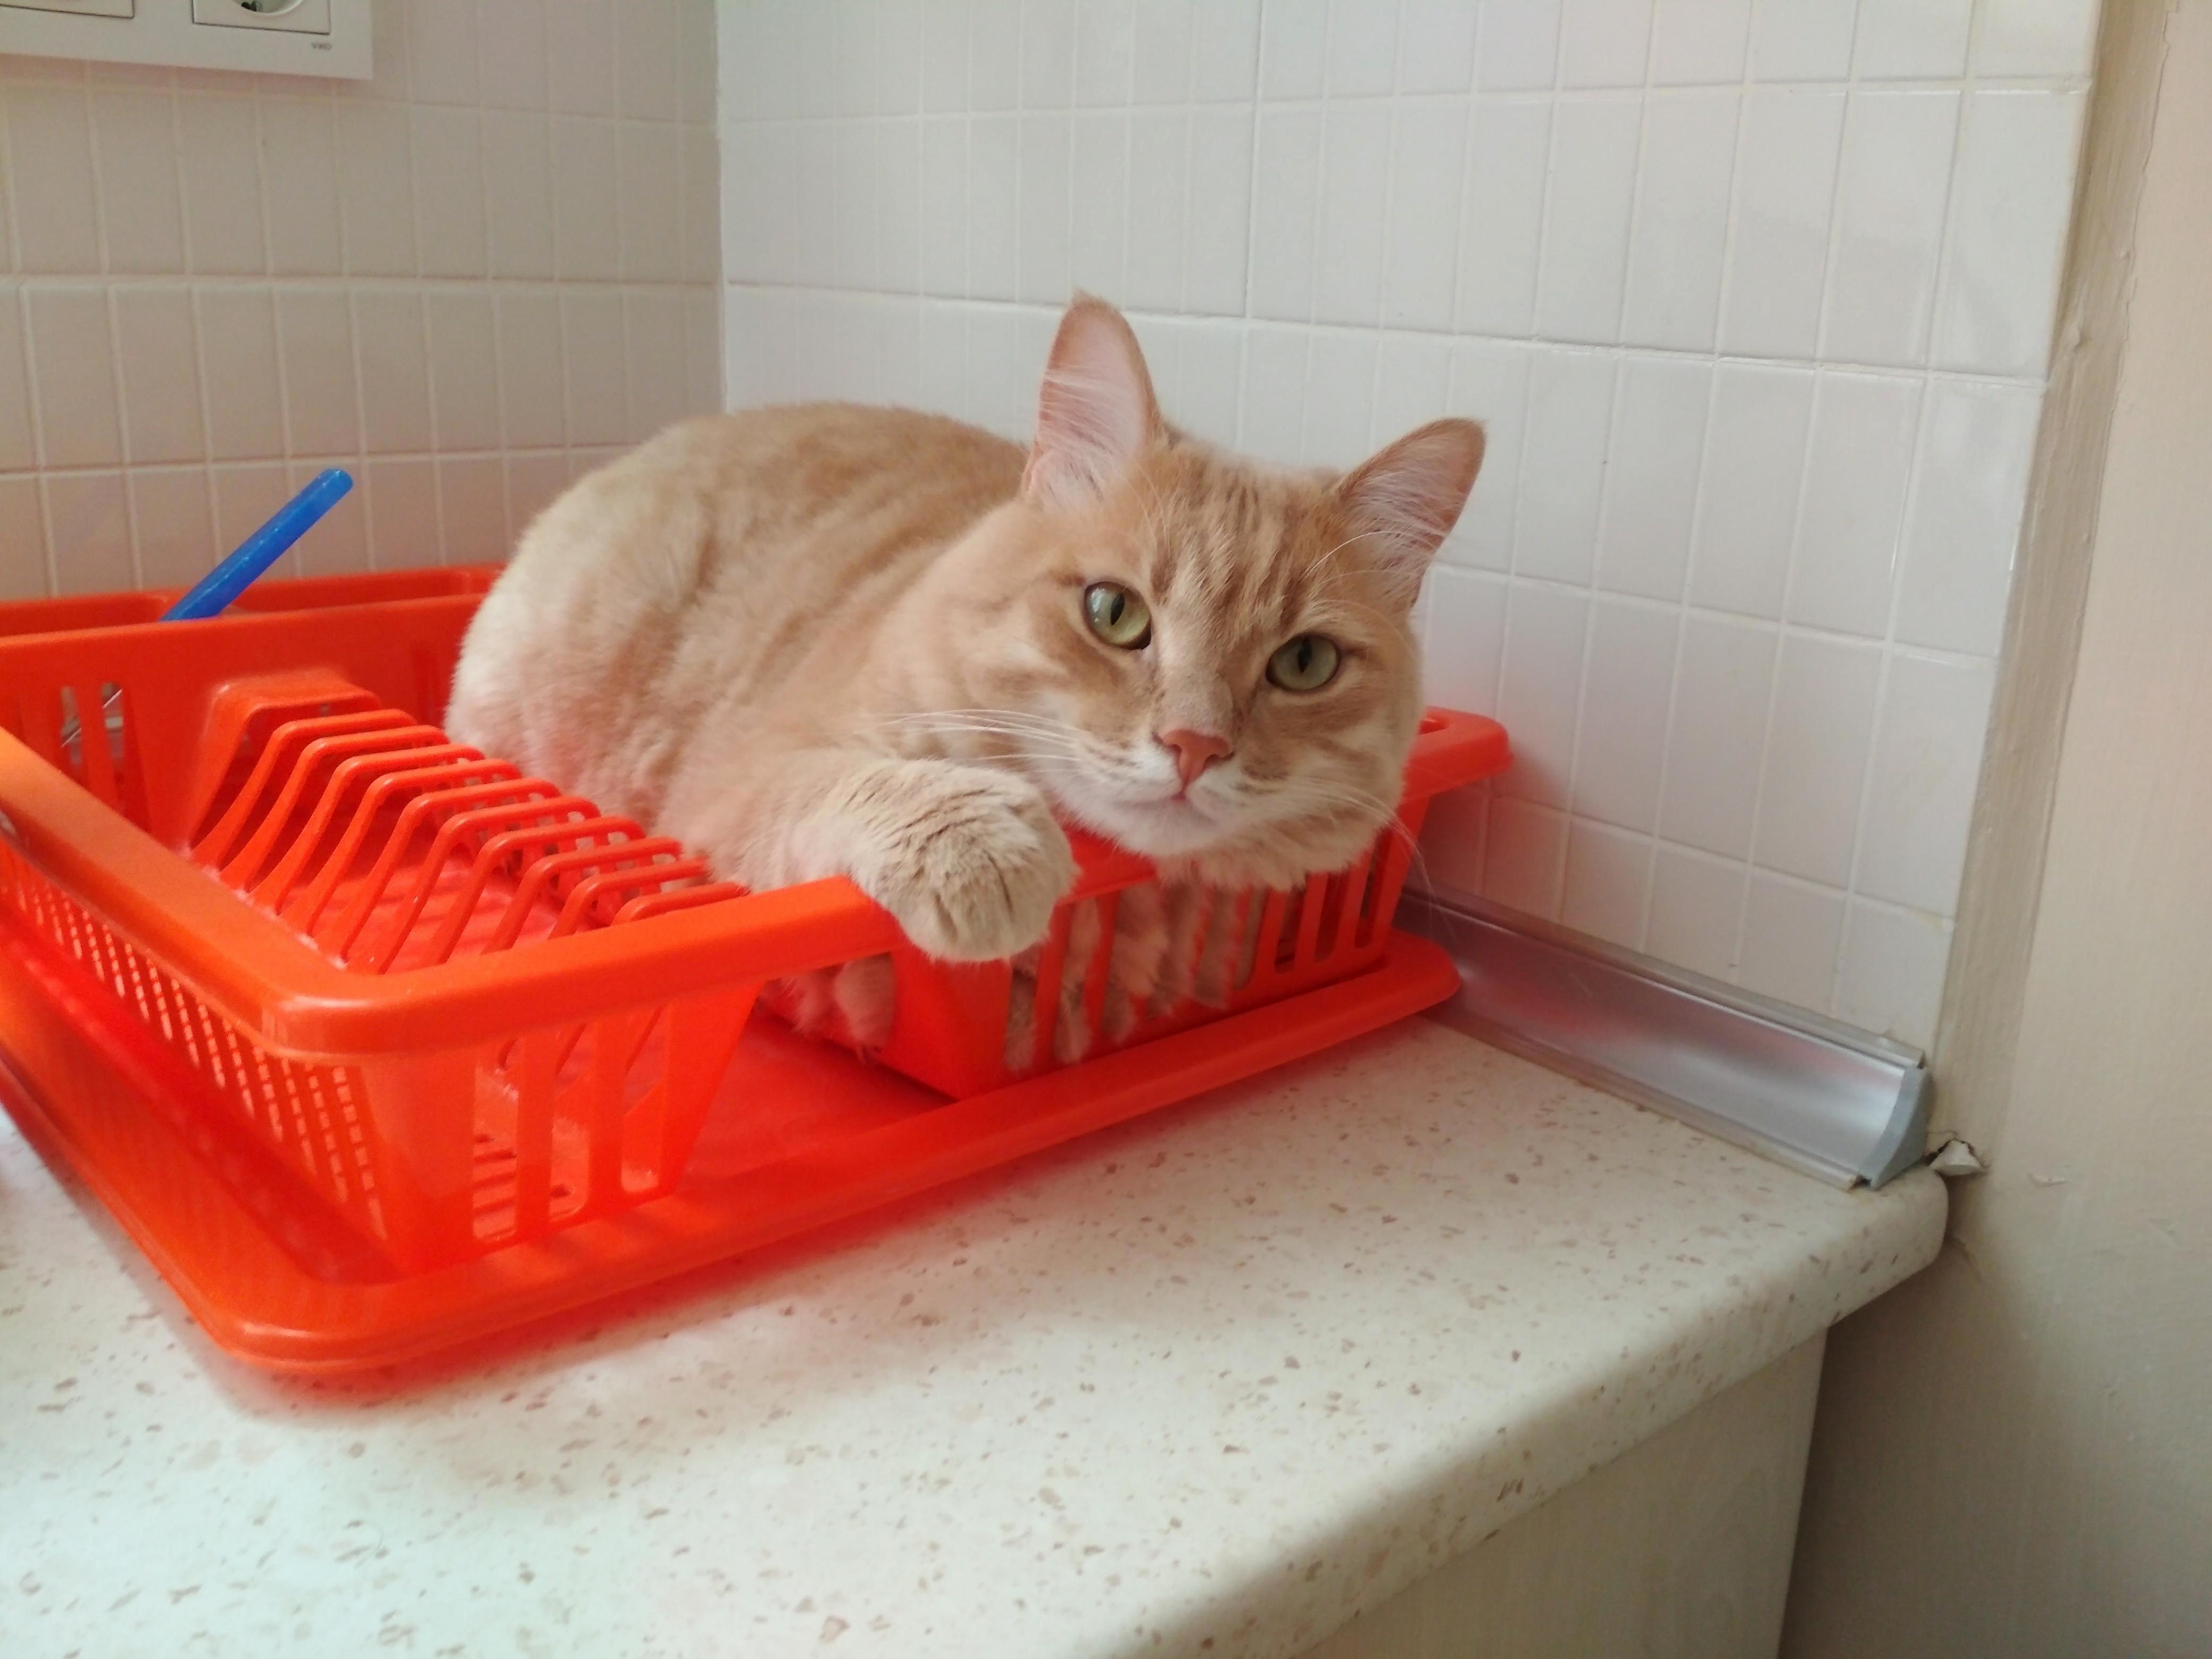 My girlfriends cat thinks he is dishes